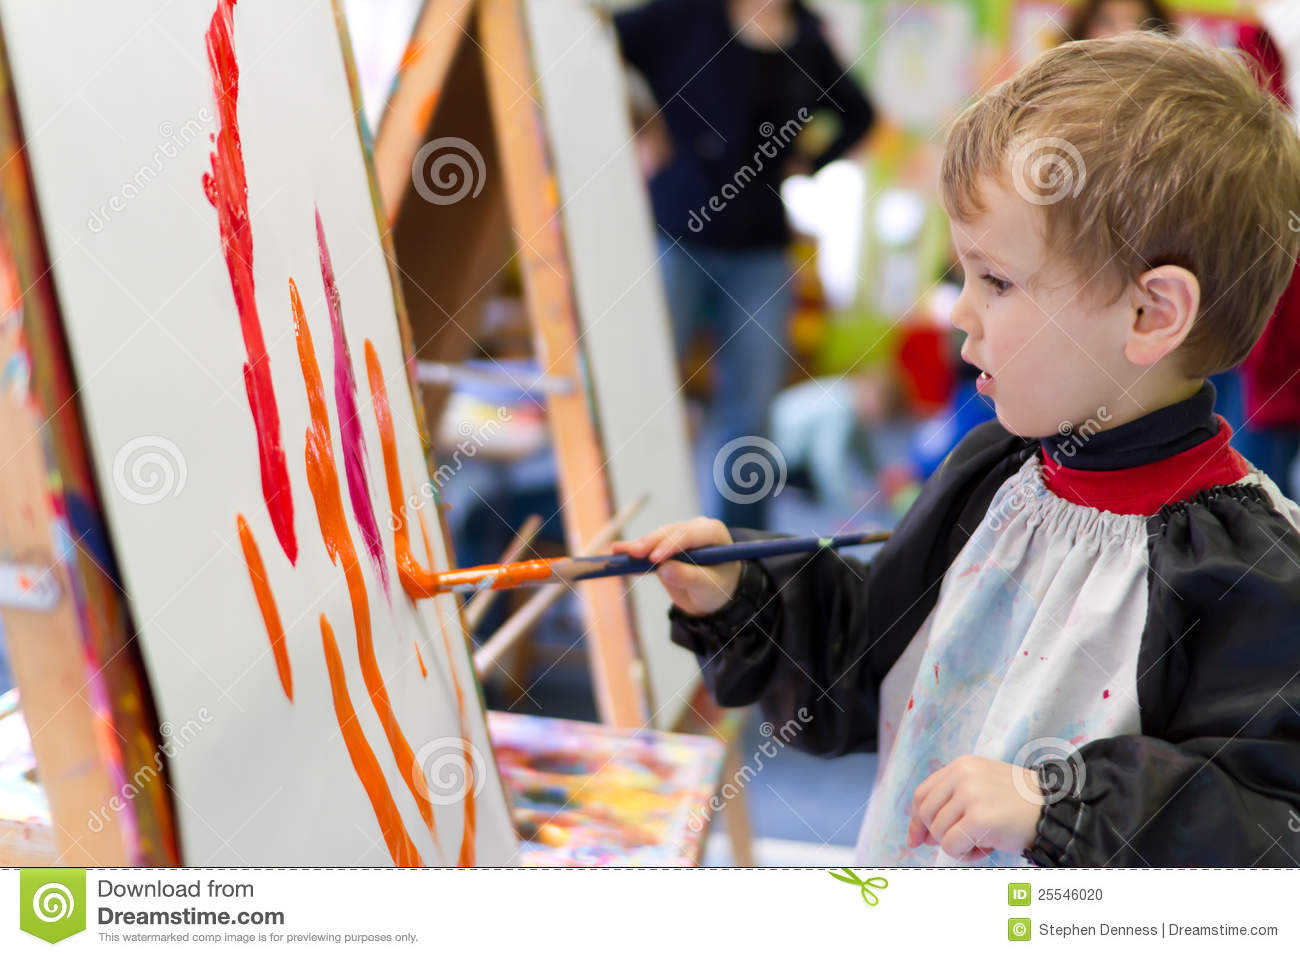 Preschool Boy Painting With Colourful Paint At Preschool